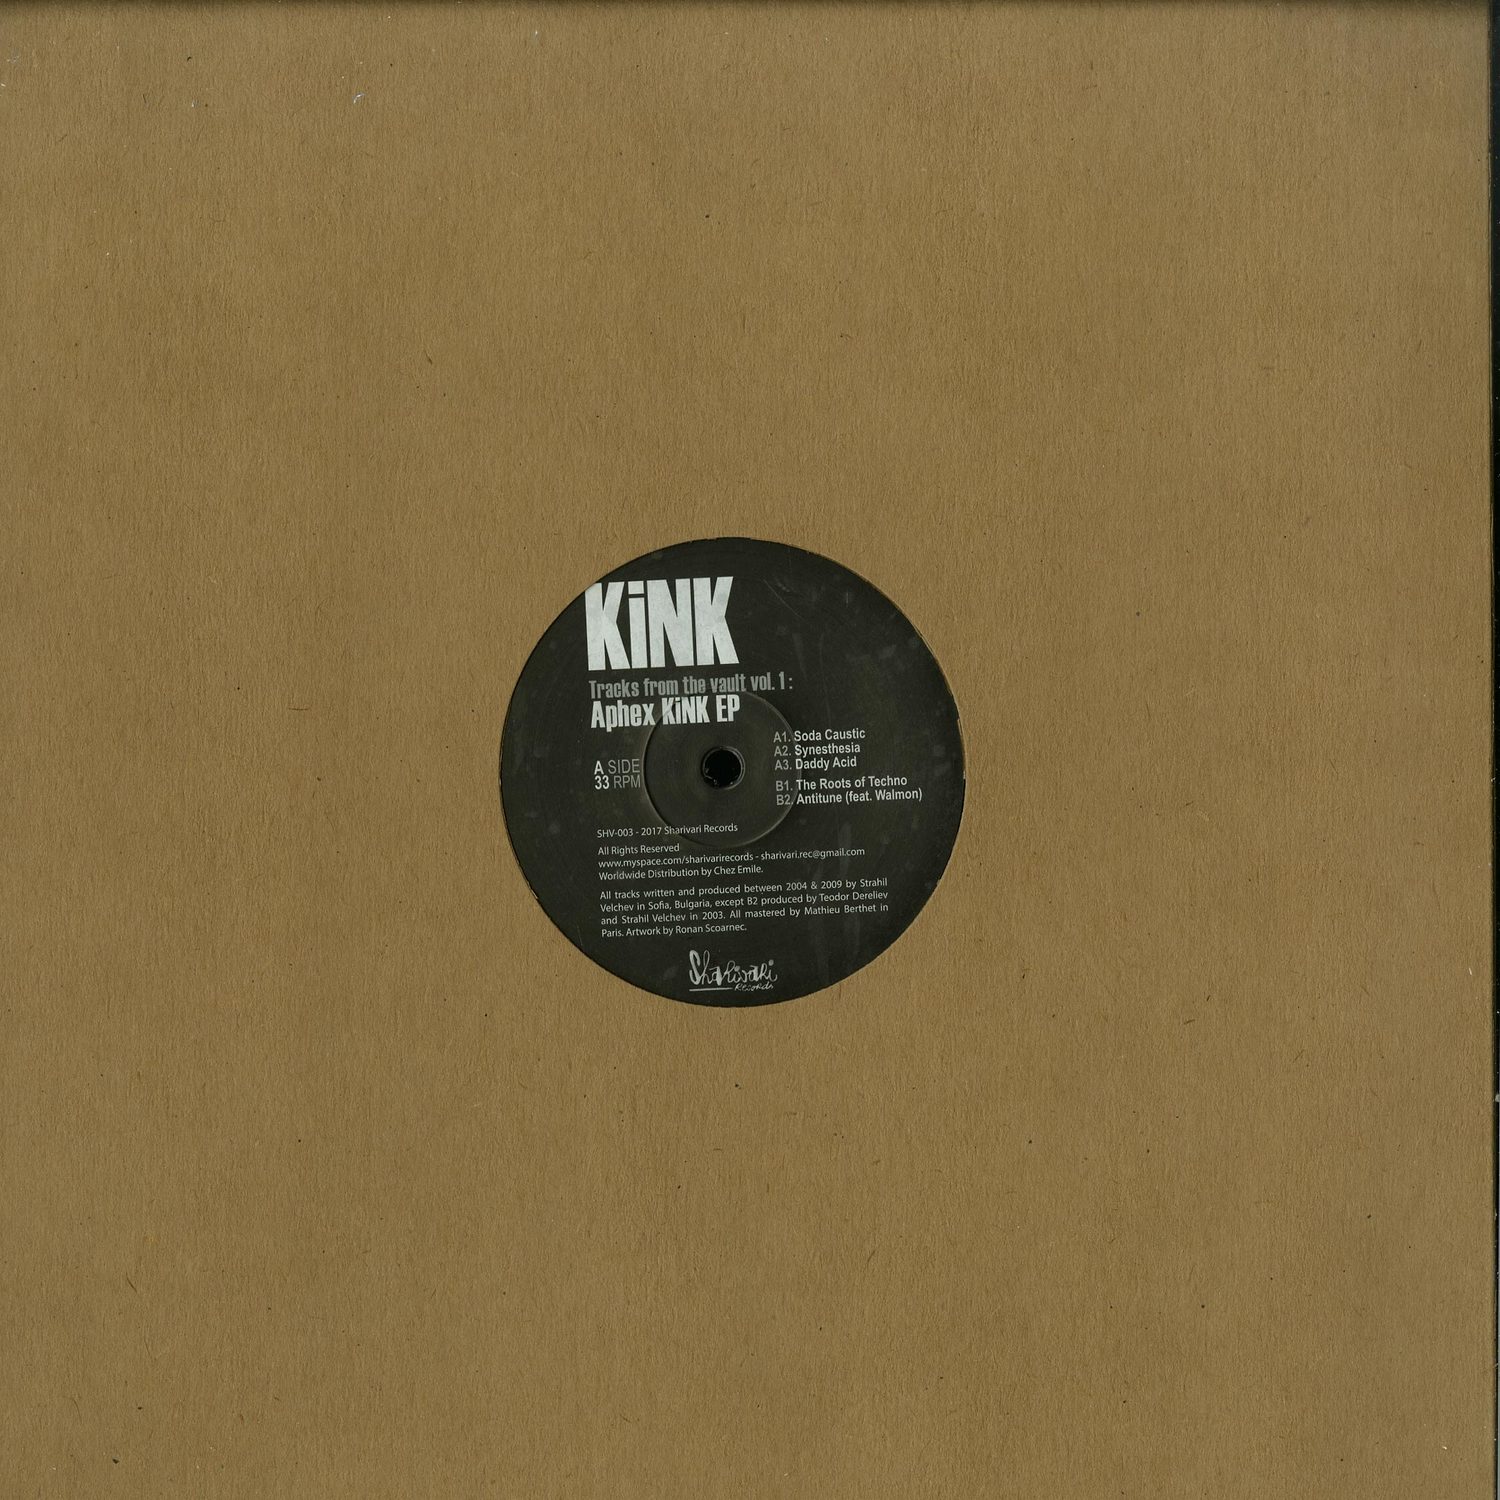 KiNK - TRACKS FROM THE VAULT VOL.1 : APHEX KINK EP